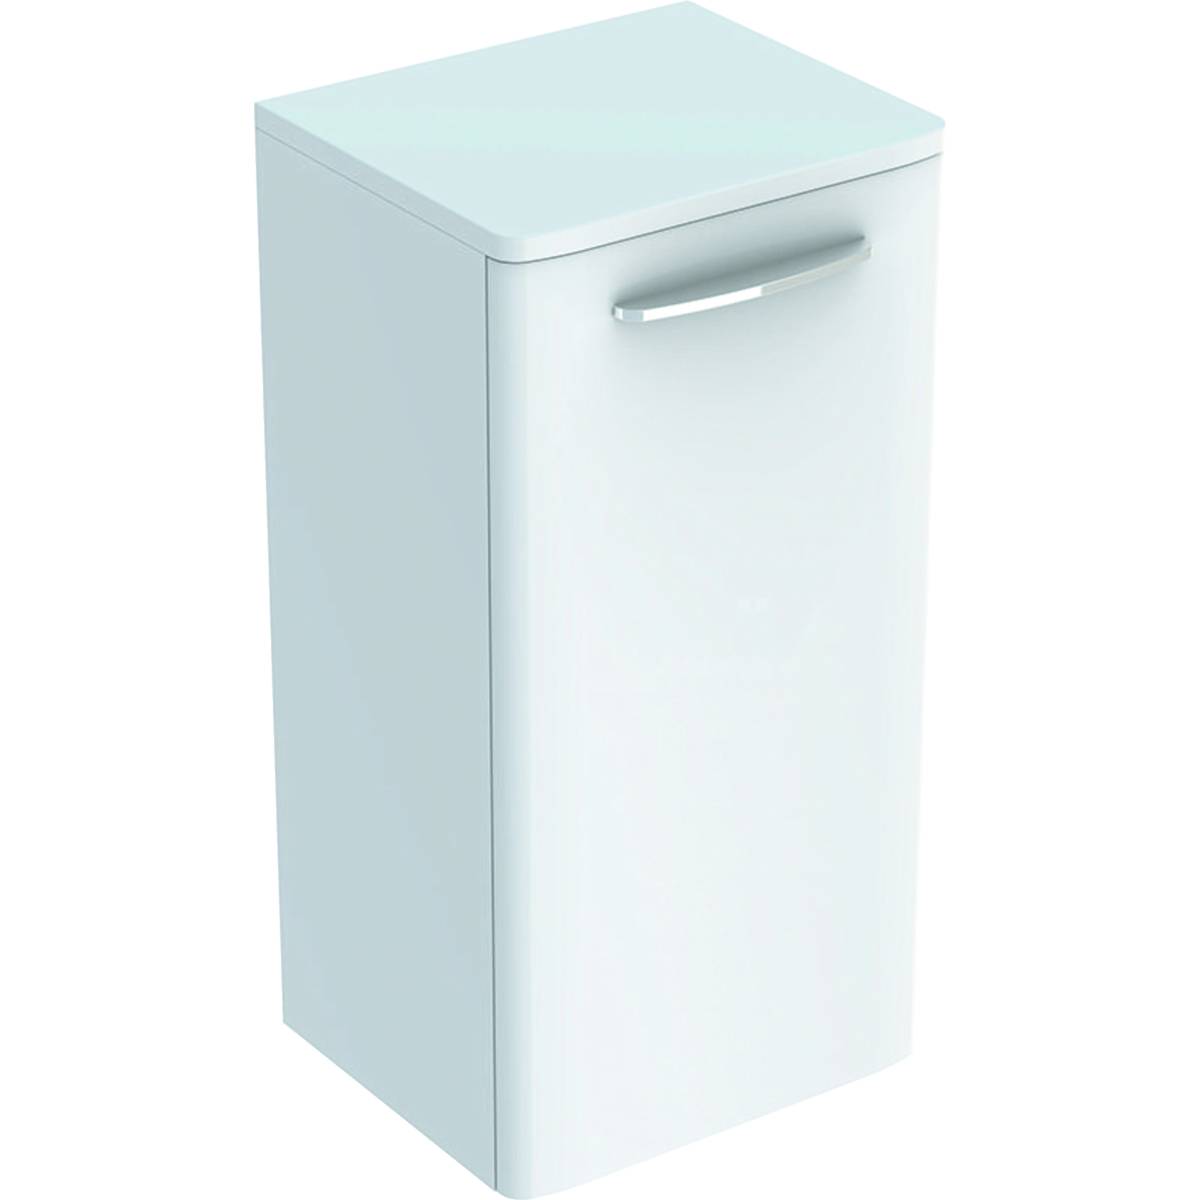 Selnova Square Low Cabinet with One Door